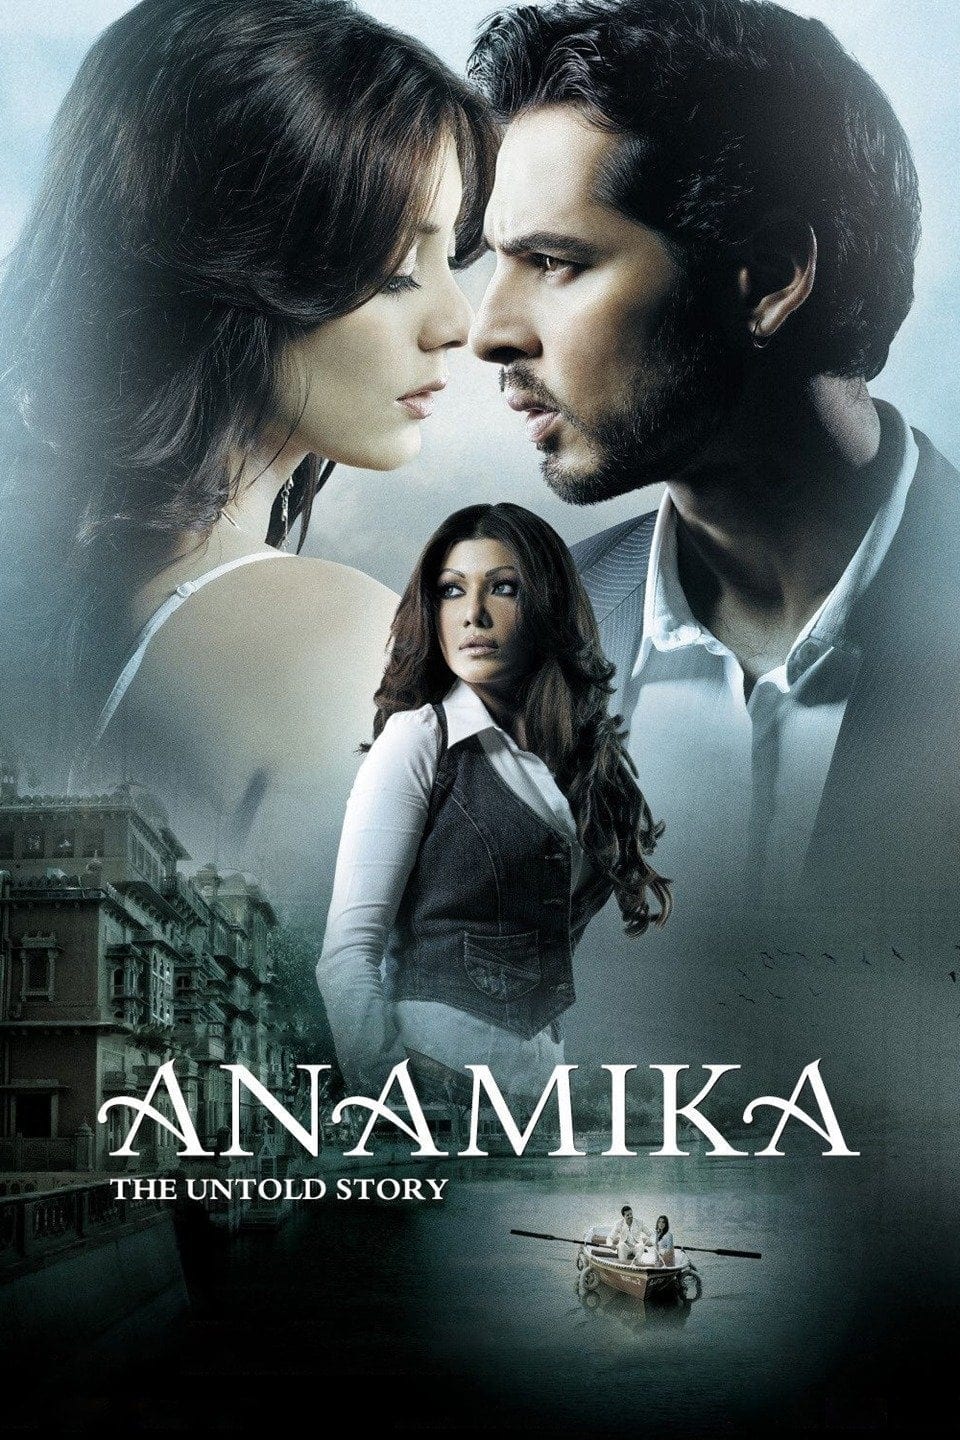 Poster for the movie "Anamika"